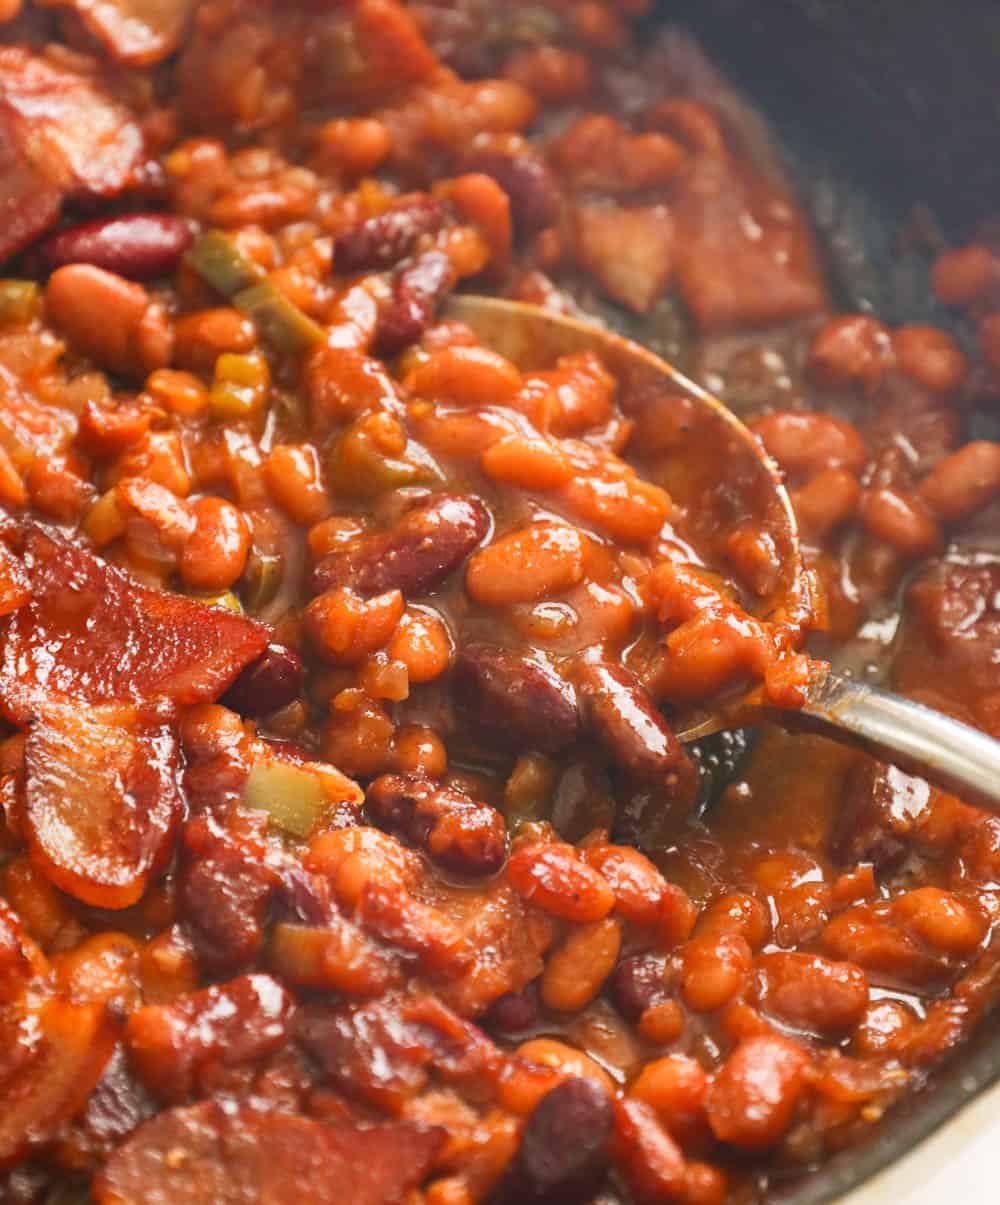 Saucy Southern Baked Beans with Bacon in a Skillet